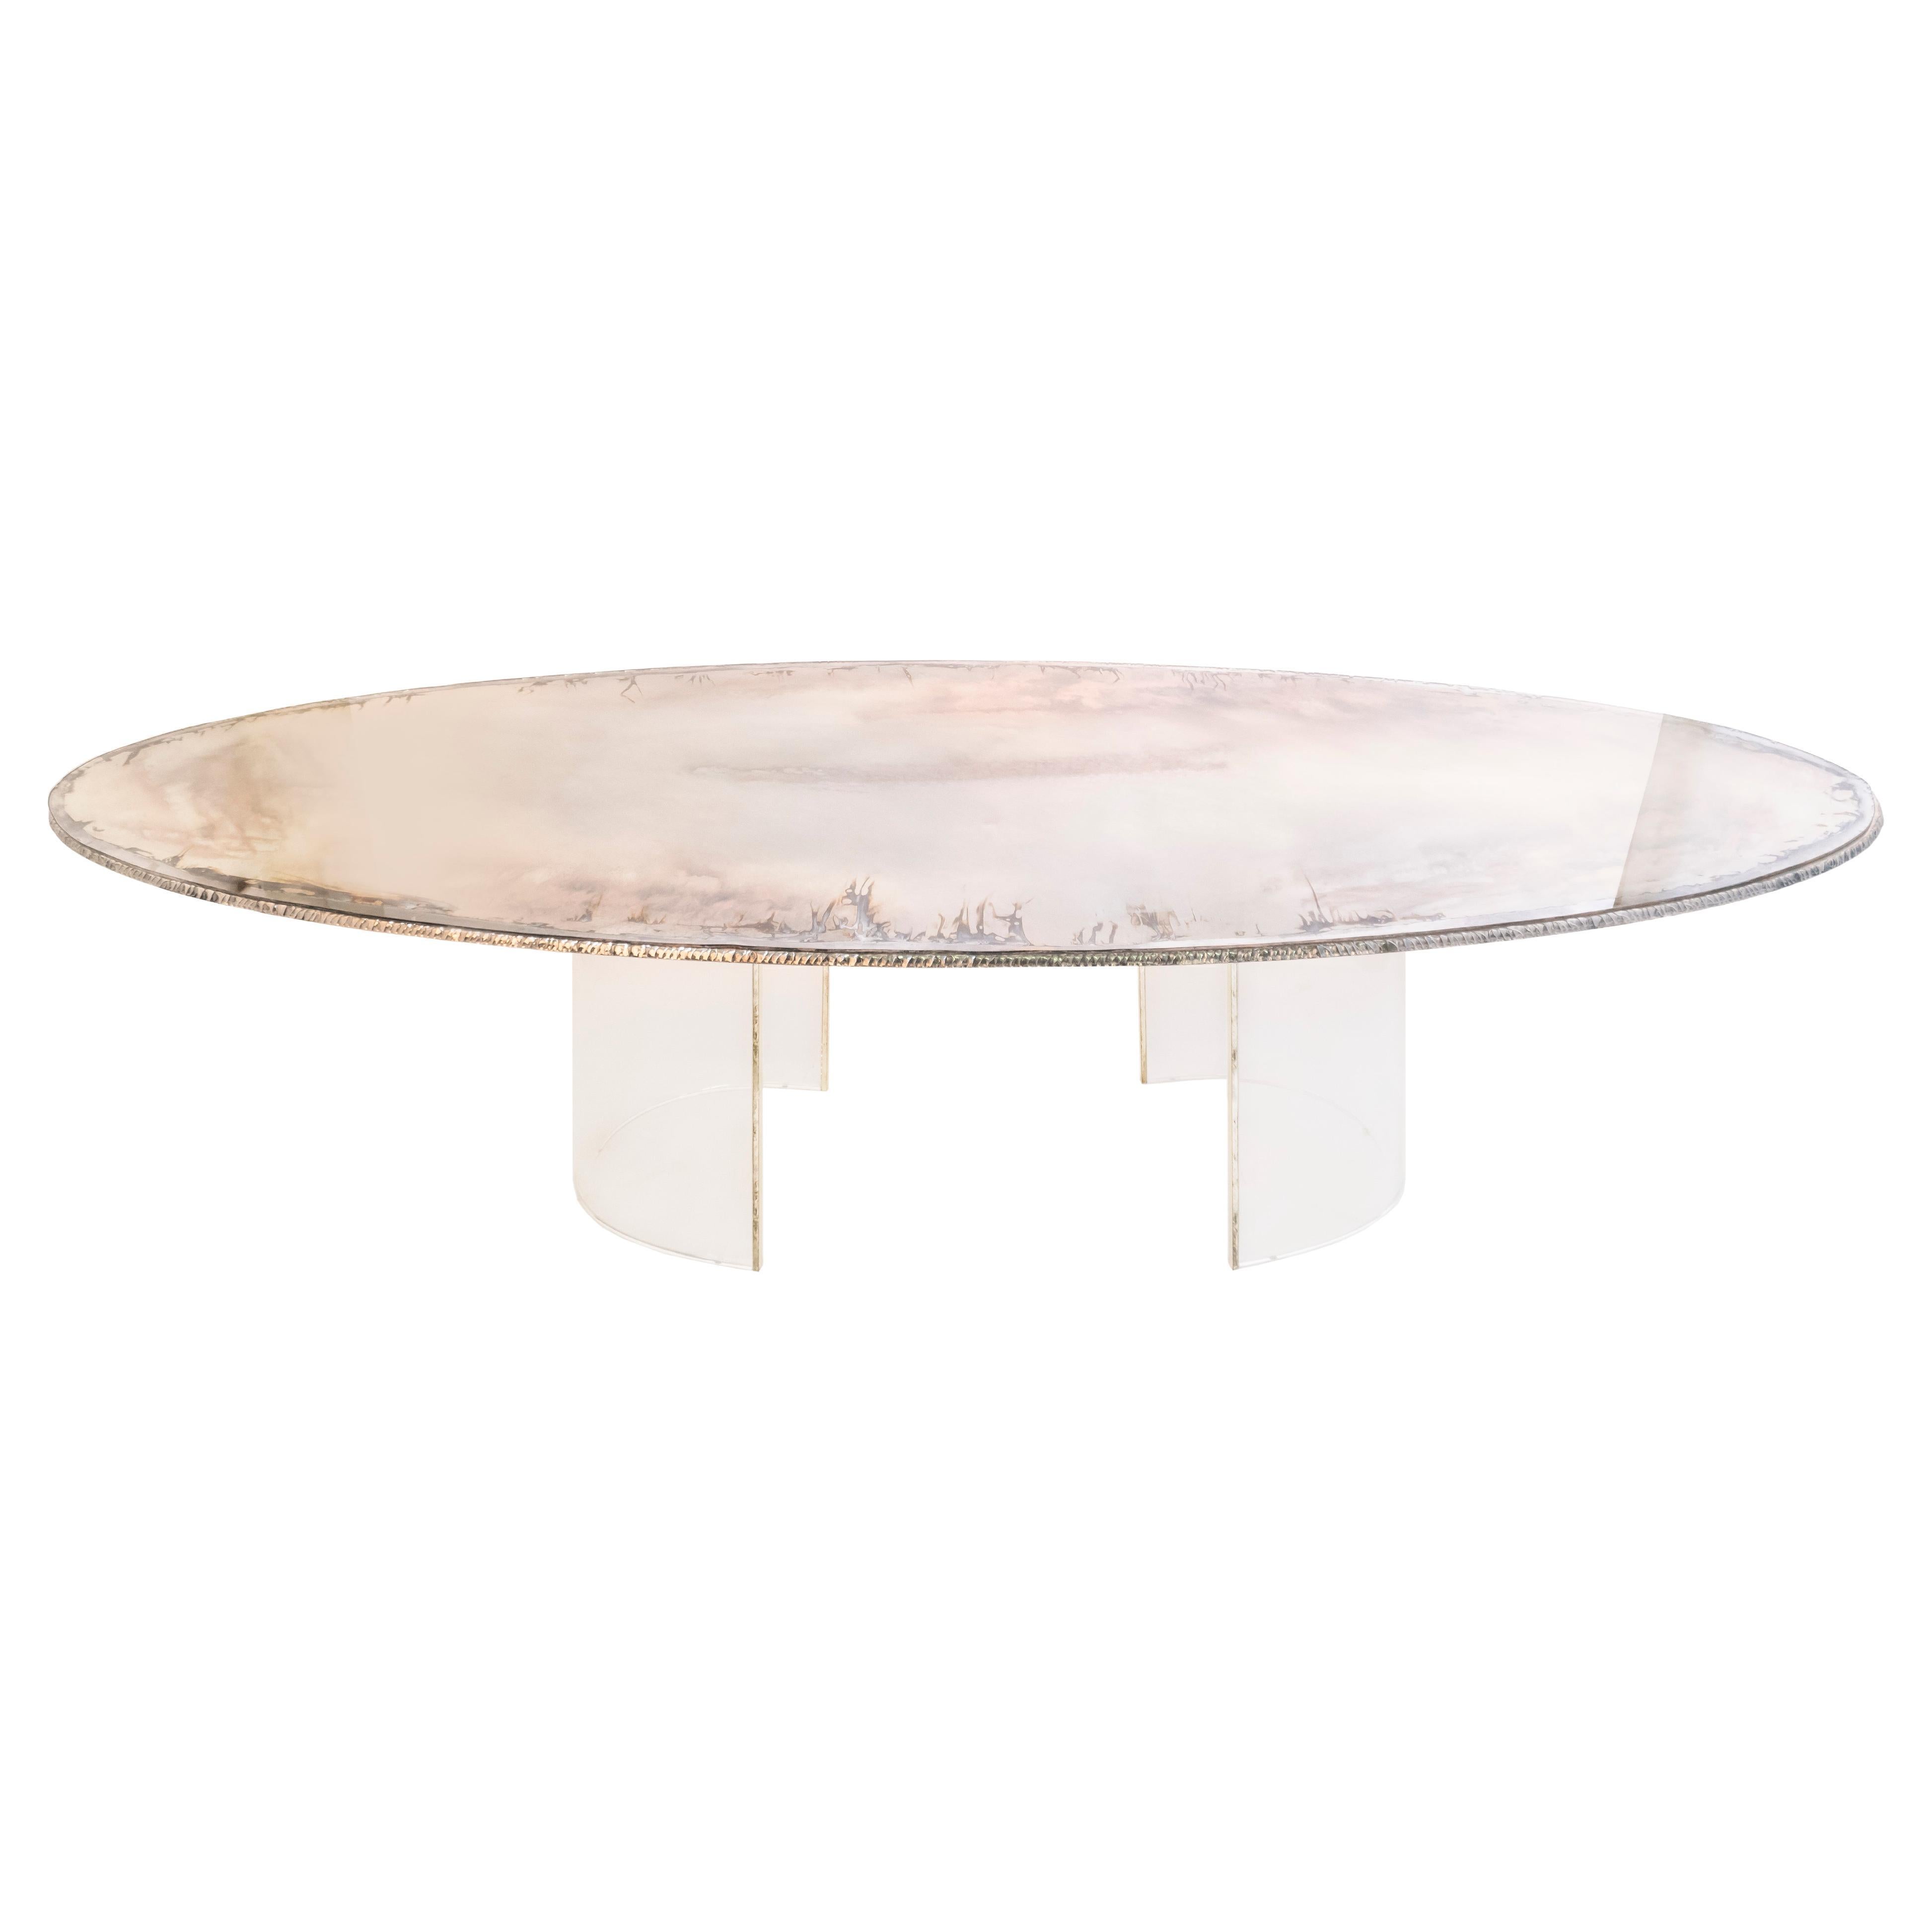 Gem, Contemporary Dining Table 200 Silvered Glass Top, Pair of "Gem" Plexy Legs